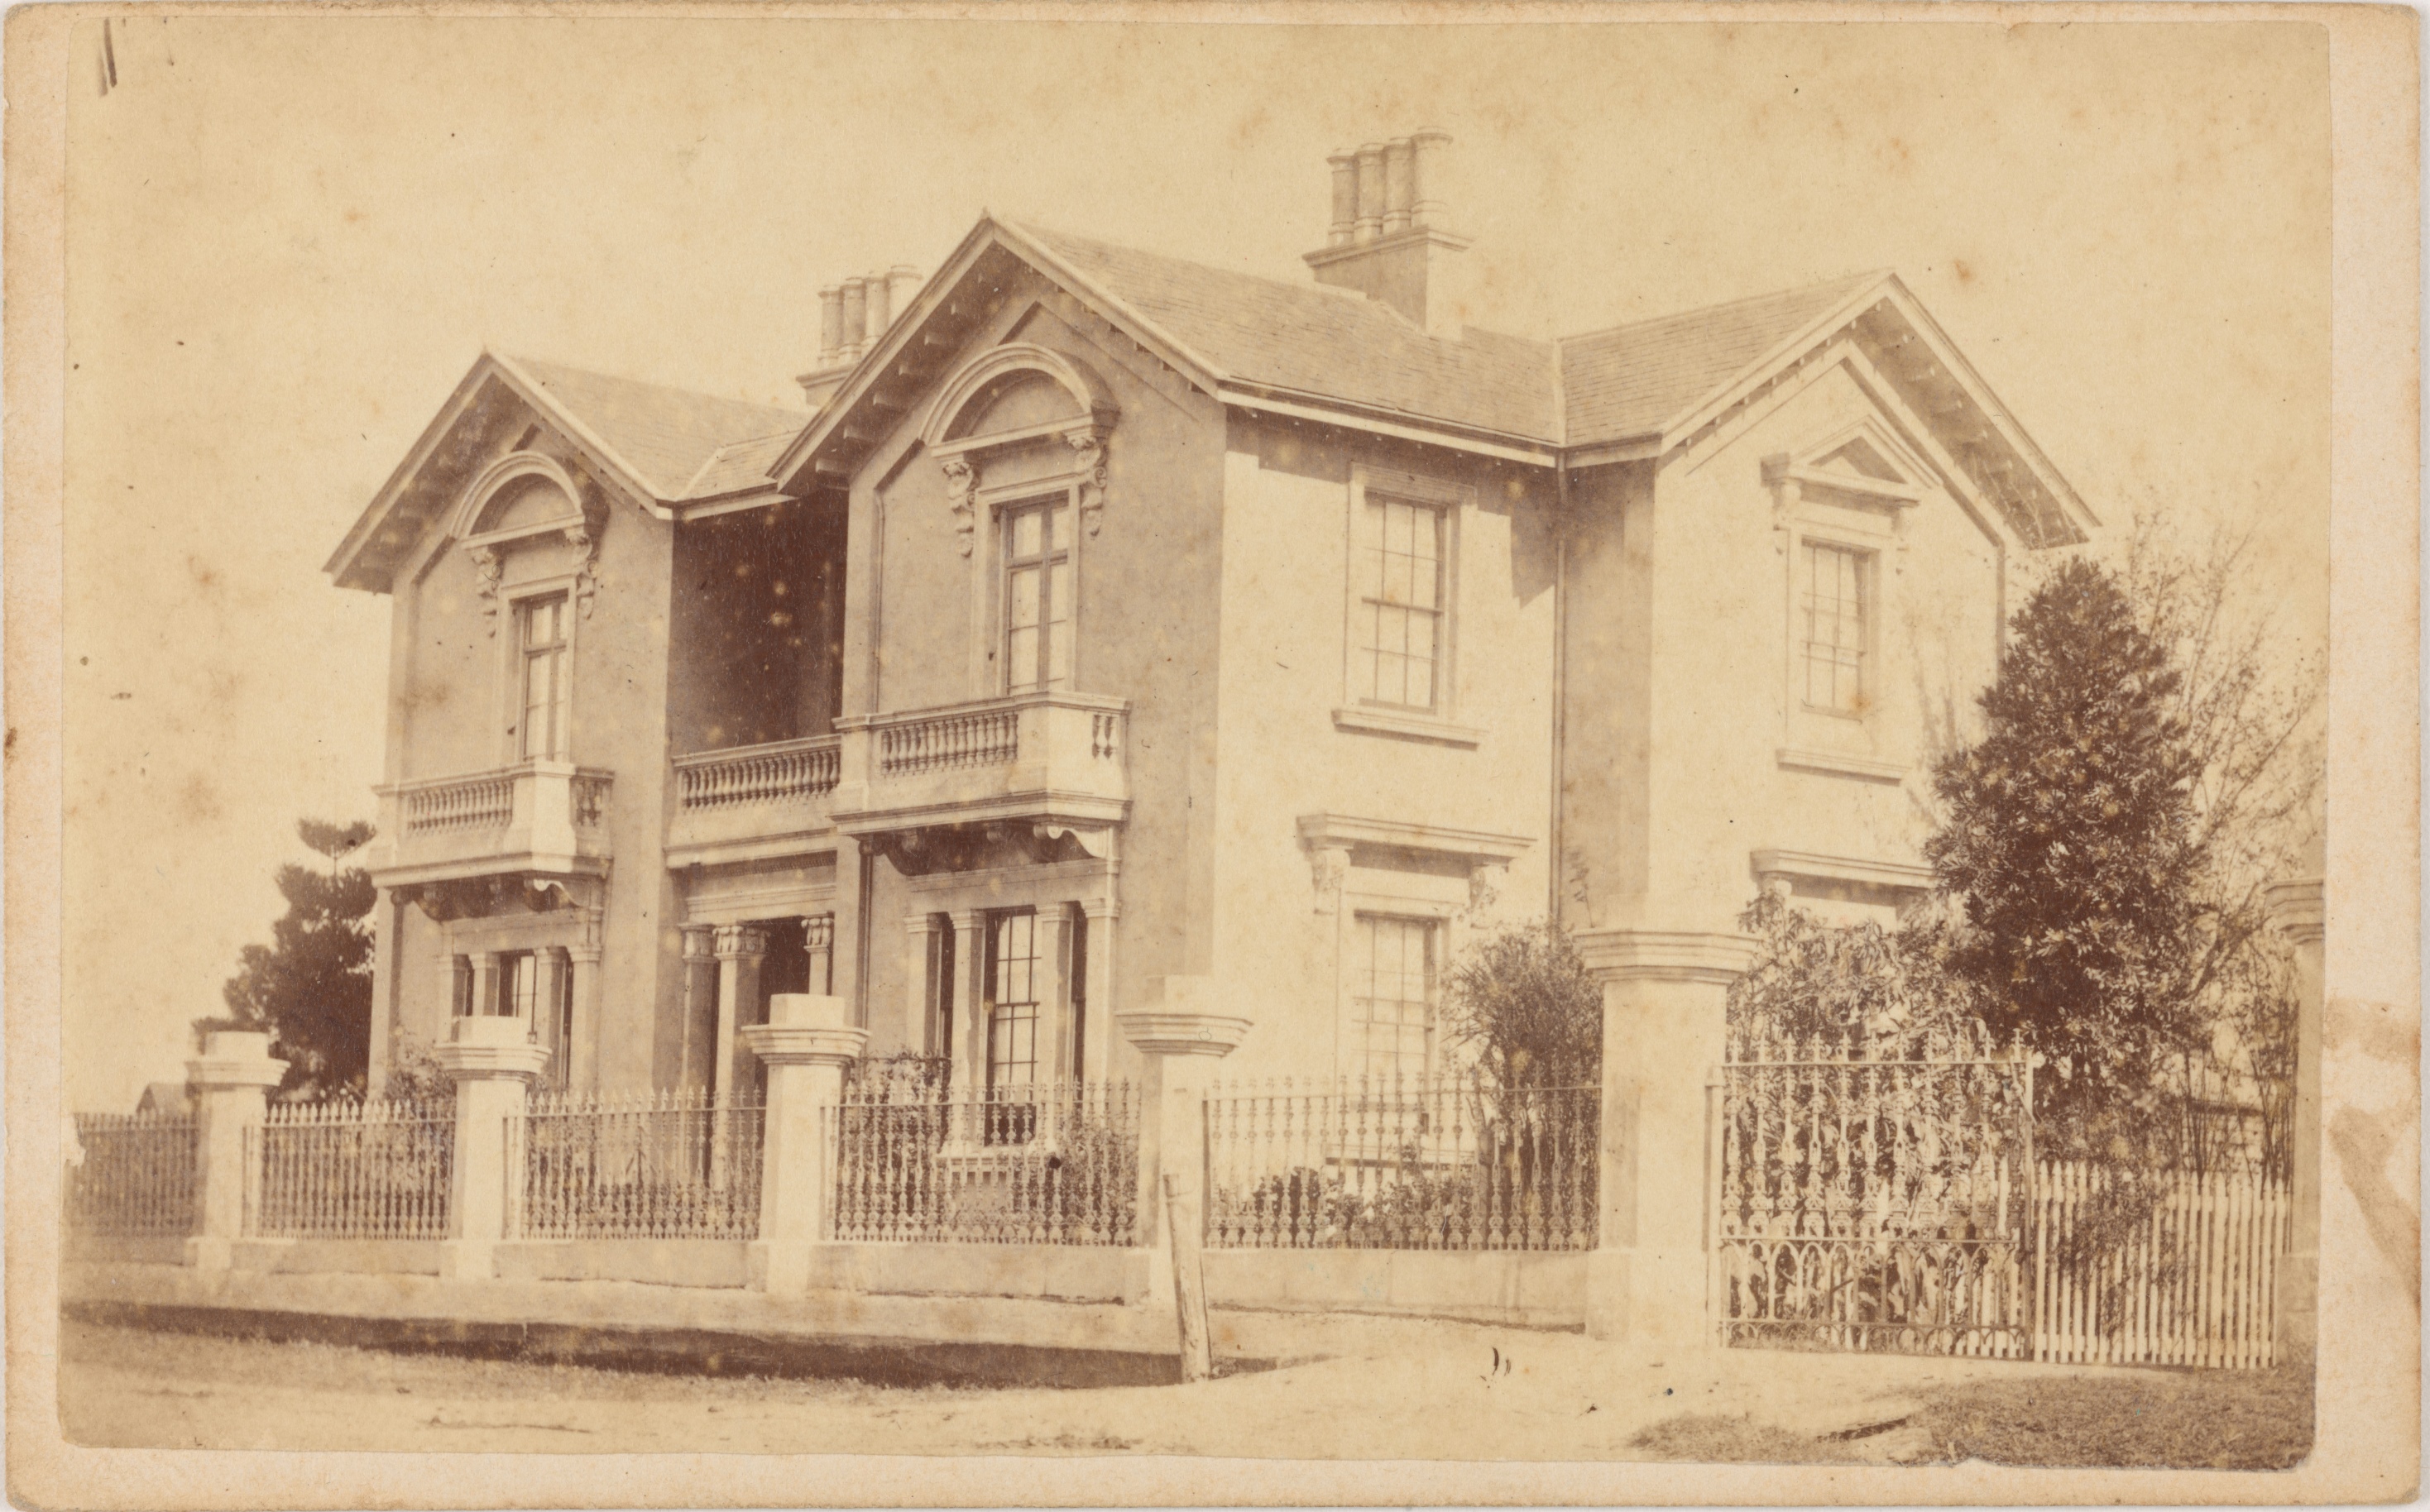 Sans Souci, Regent Street, West Maitland, residence of Henry Septimus Badgery, ca.1874 / A. Curtis, Photographer and Artist